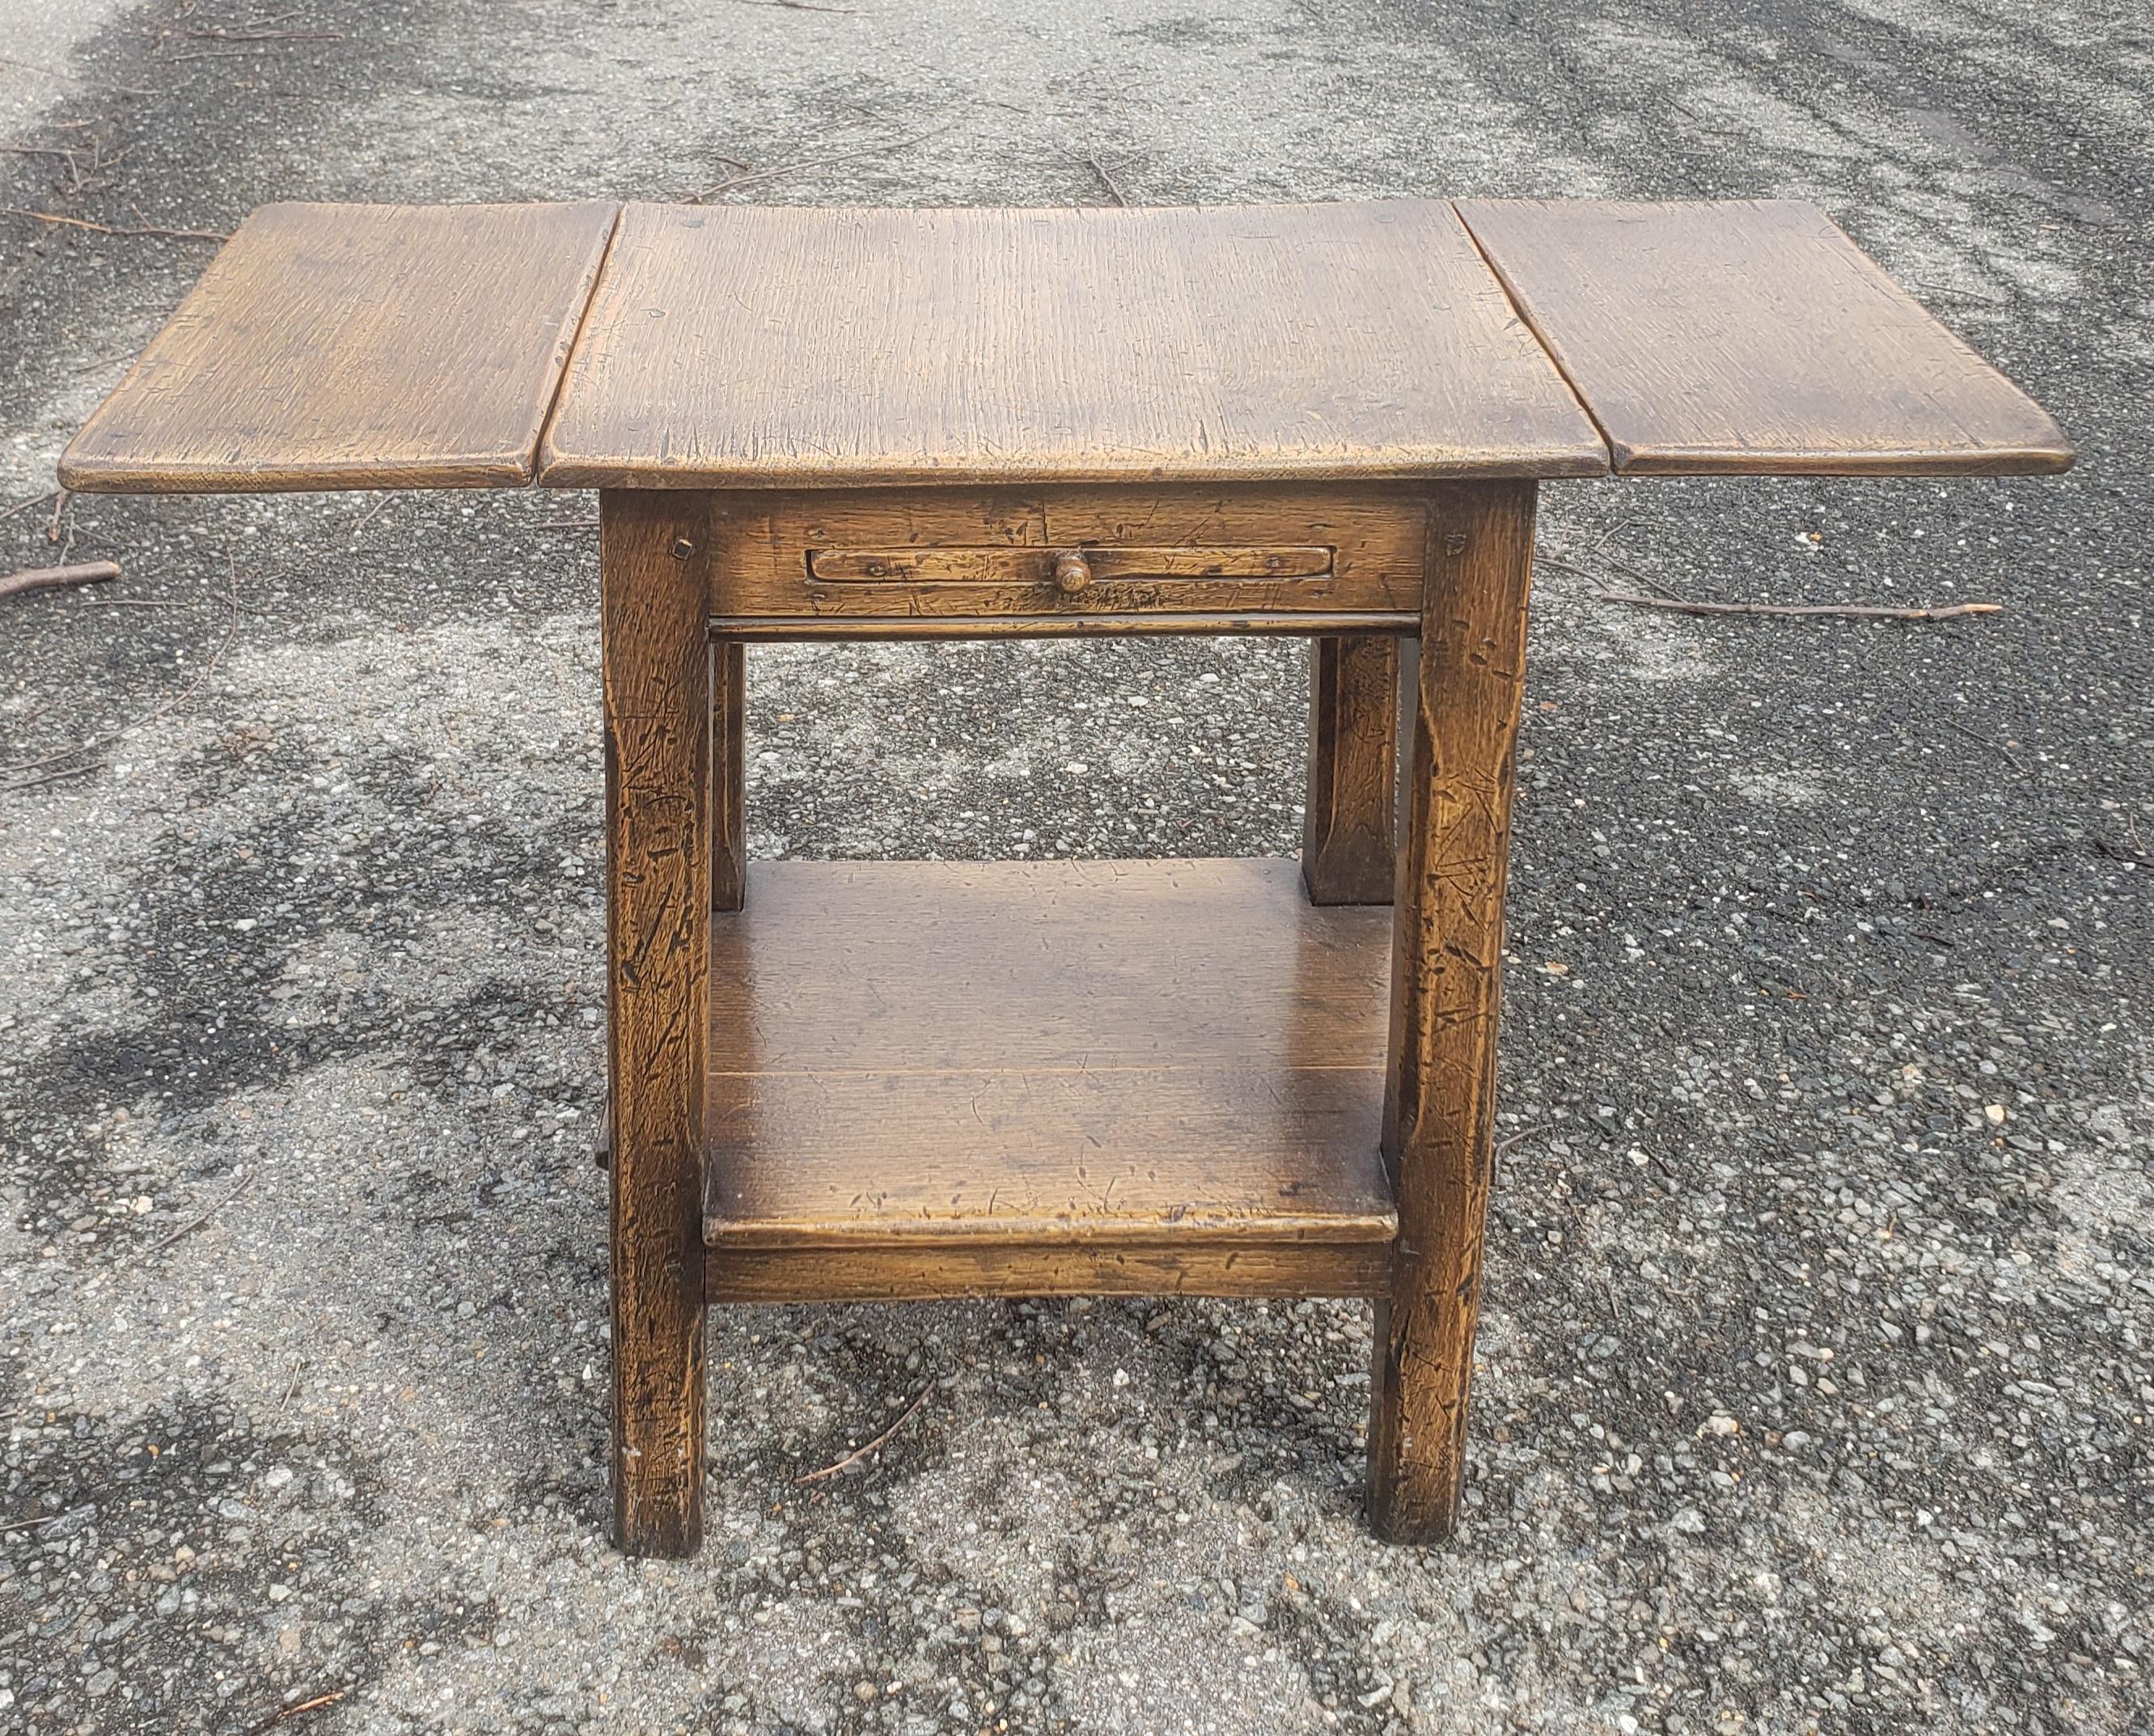 Hand-Crafted Early American Oak Drop-Leaf Side Table with Pull-Out Tray, circa 1890s